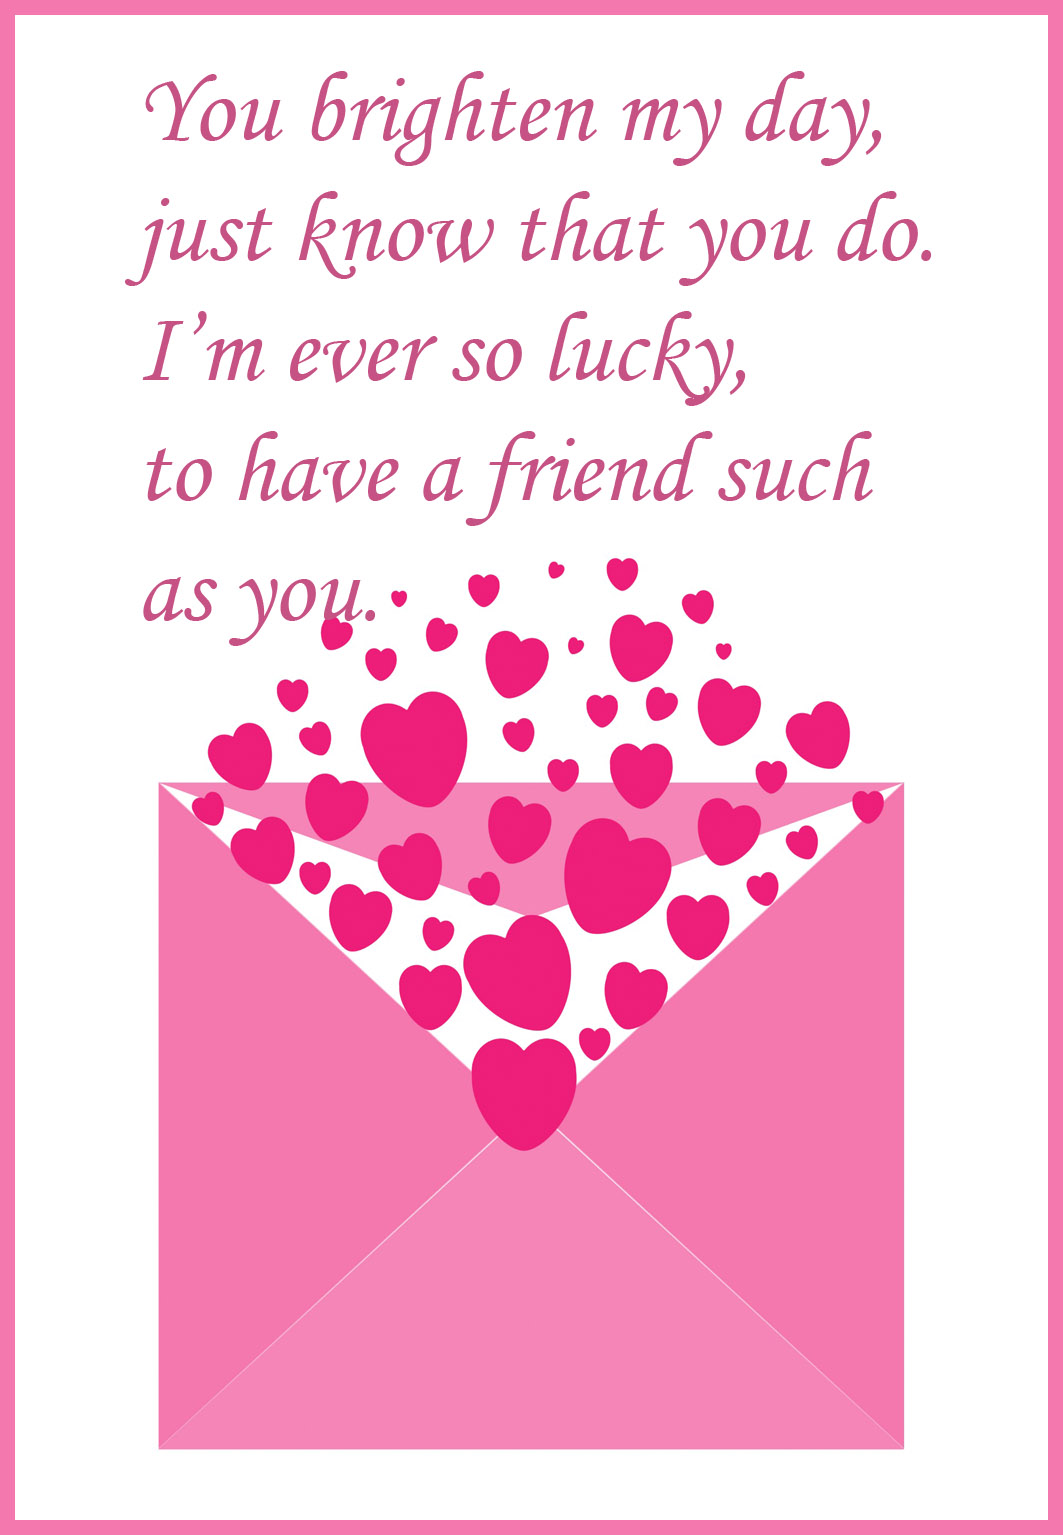 friendship-valentines-day-cards-amy-rees-anderson-s-blog